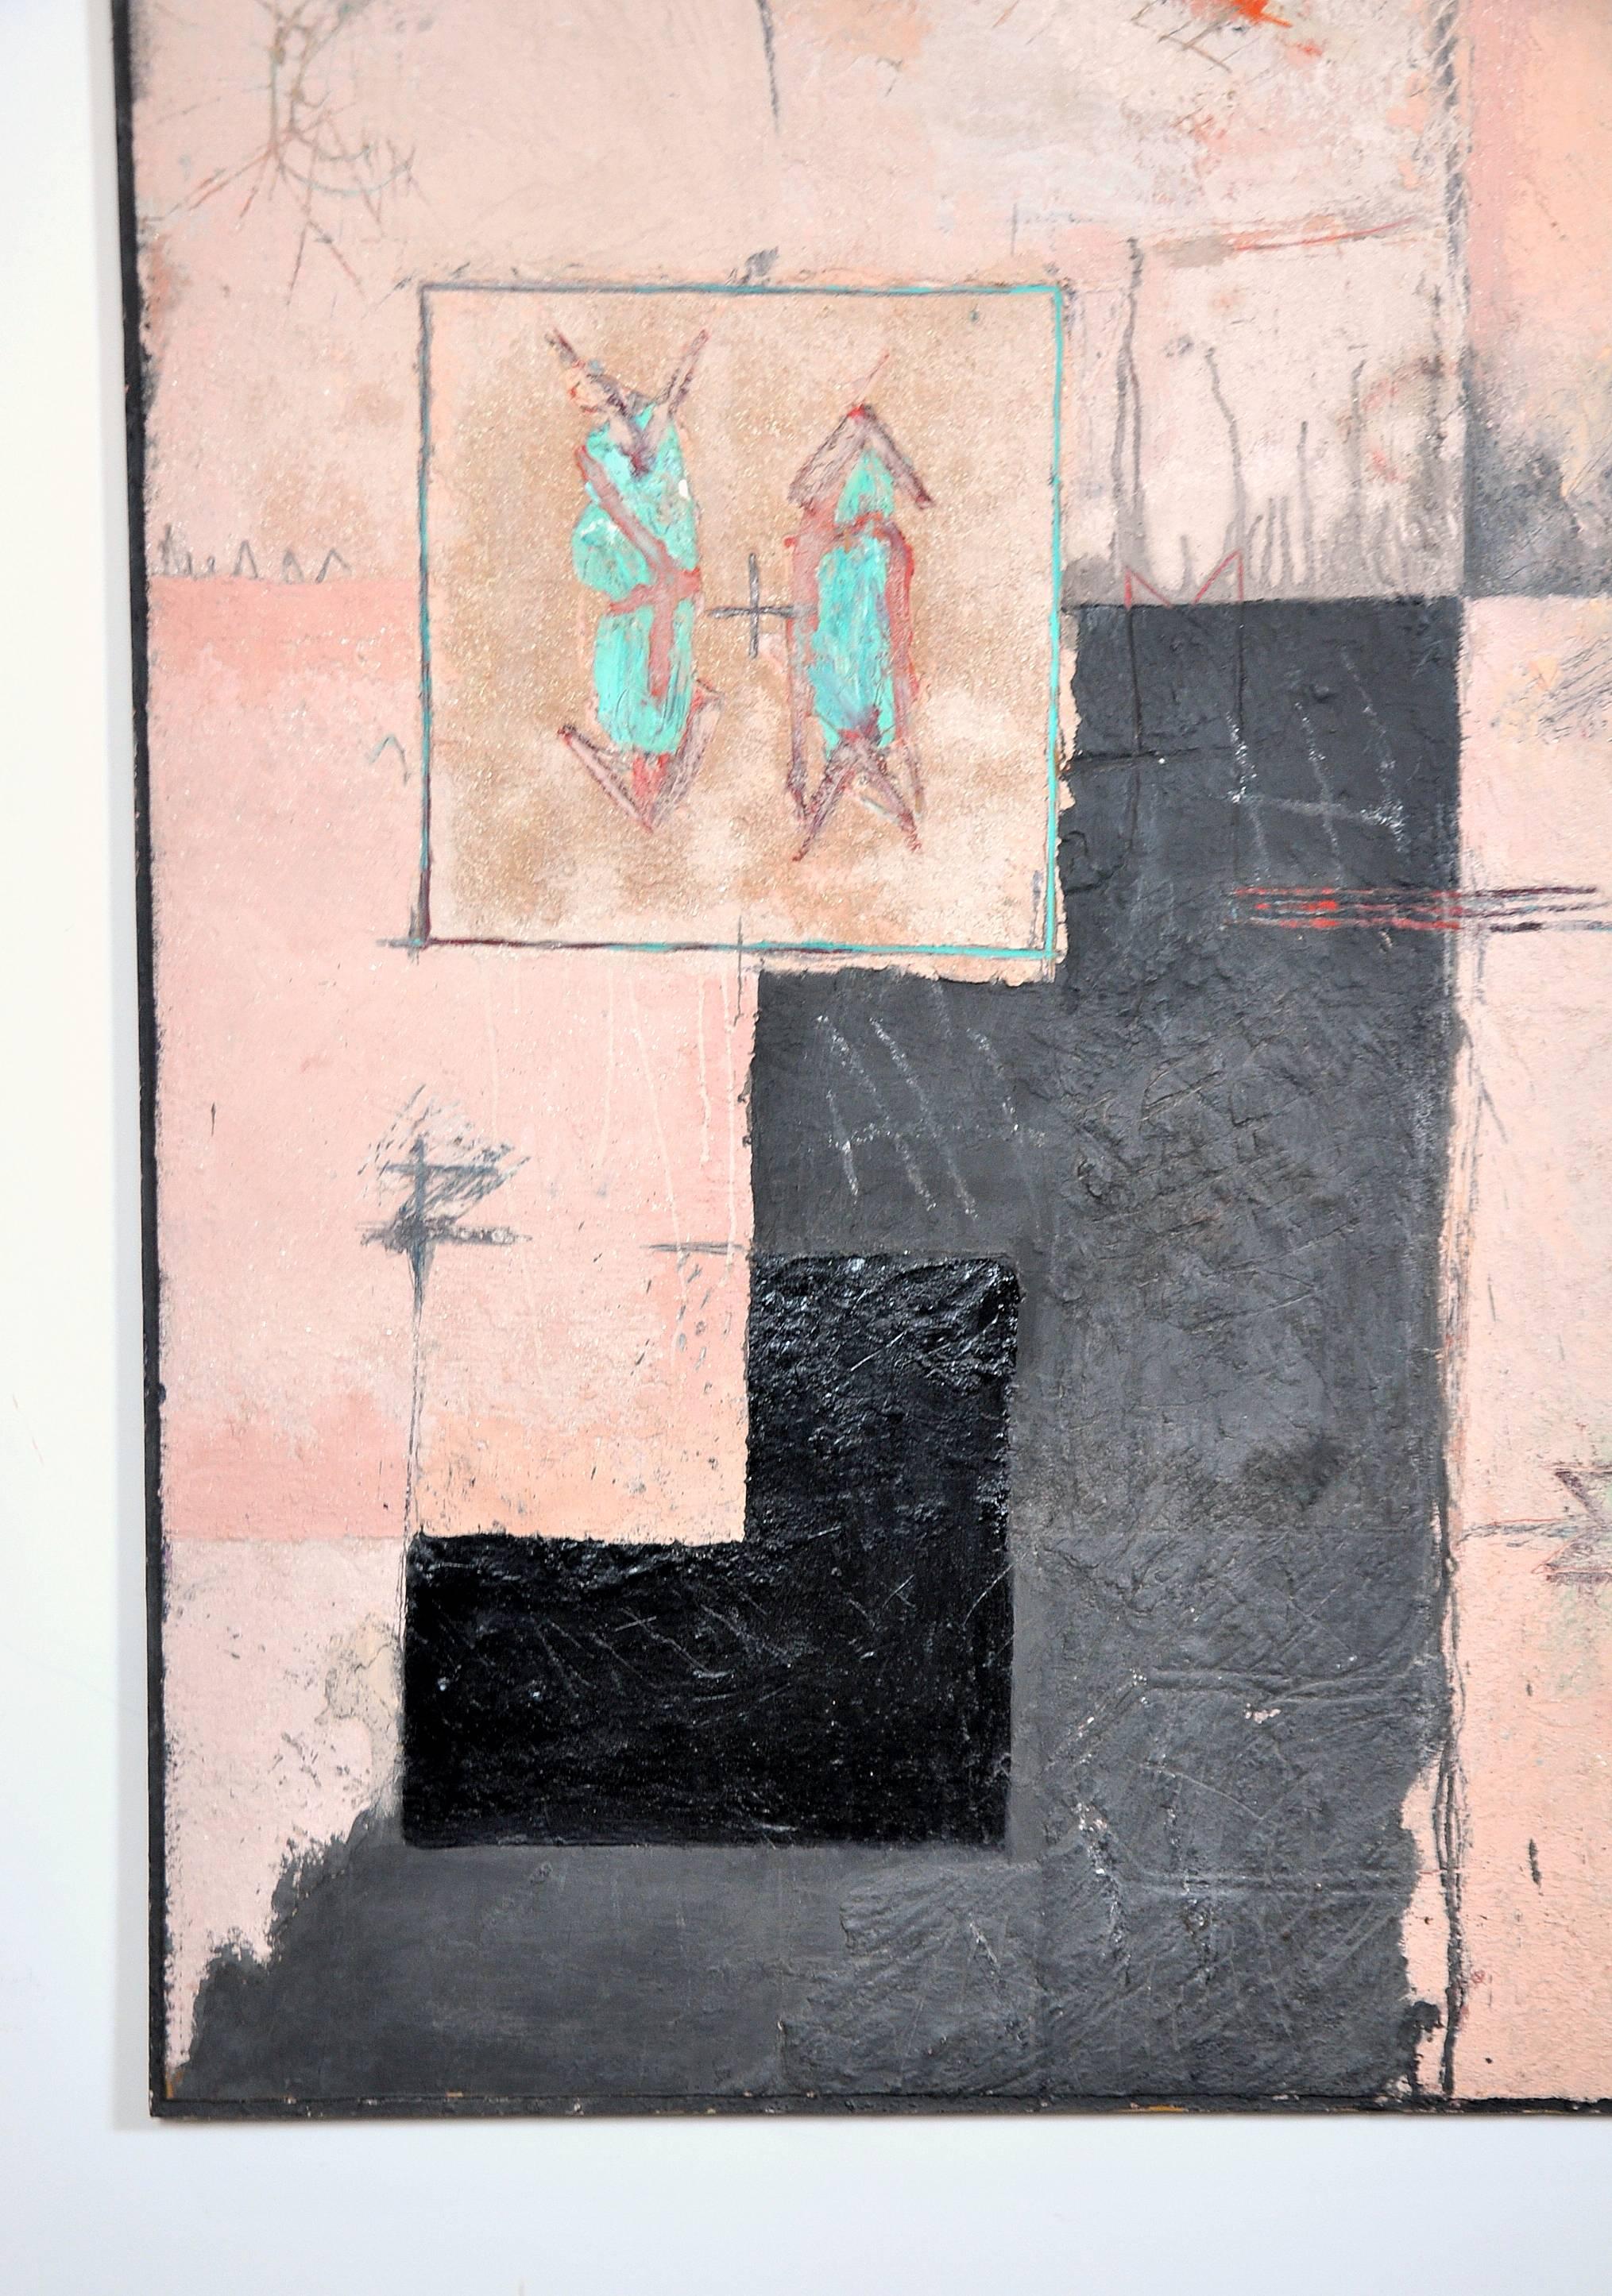 Large and captivating mixed media on black painted board featuring black, grey, peach and turquoise tones by contemporary artist Lucy Voelcker.
Lucy Voelcker (B. 1959) is a British visual artist. Several works by the artist have been sold at